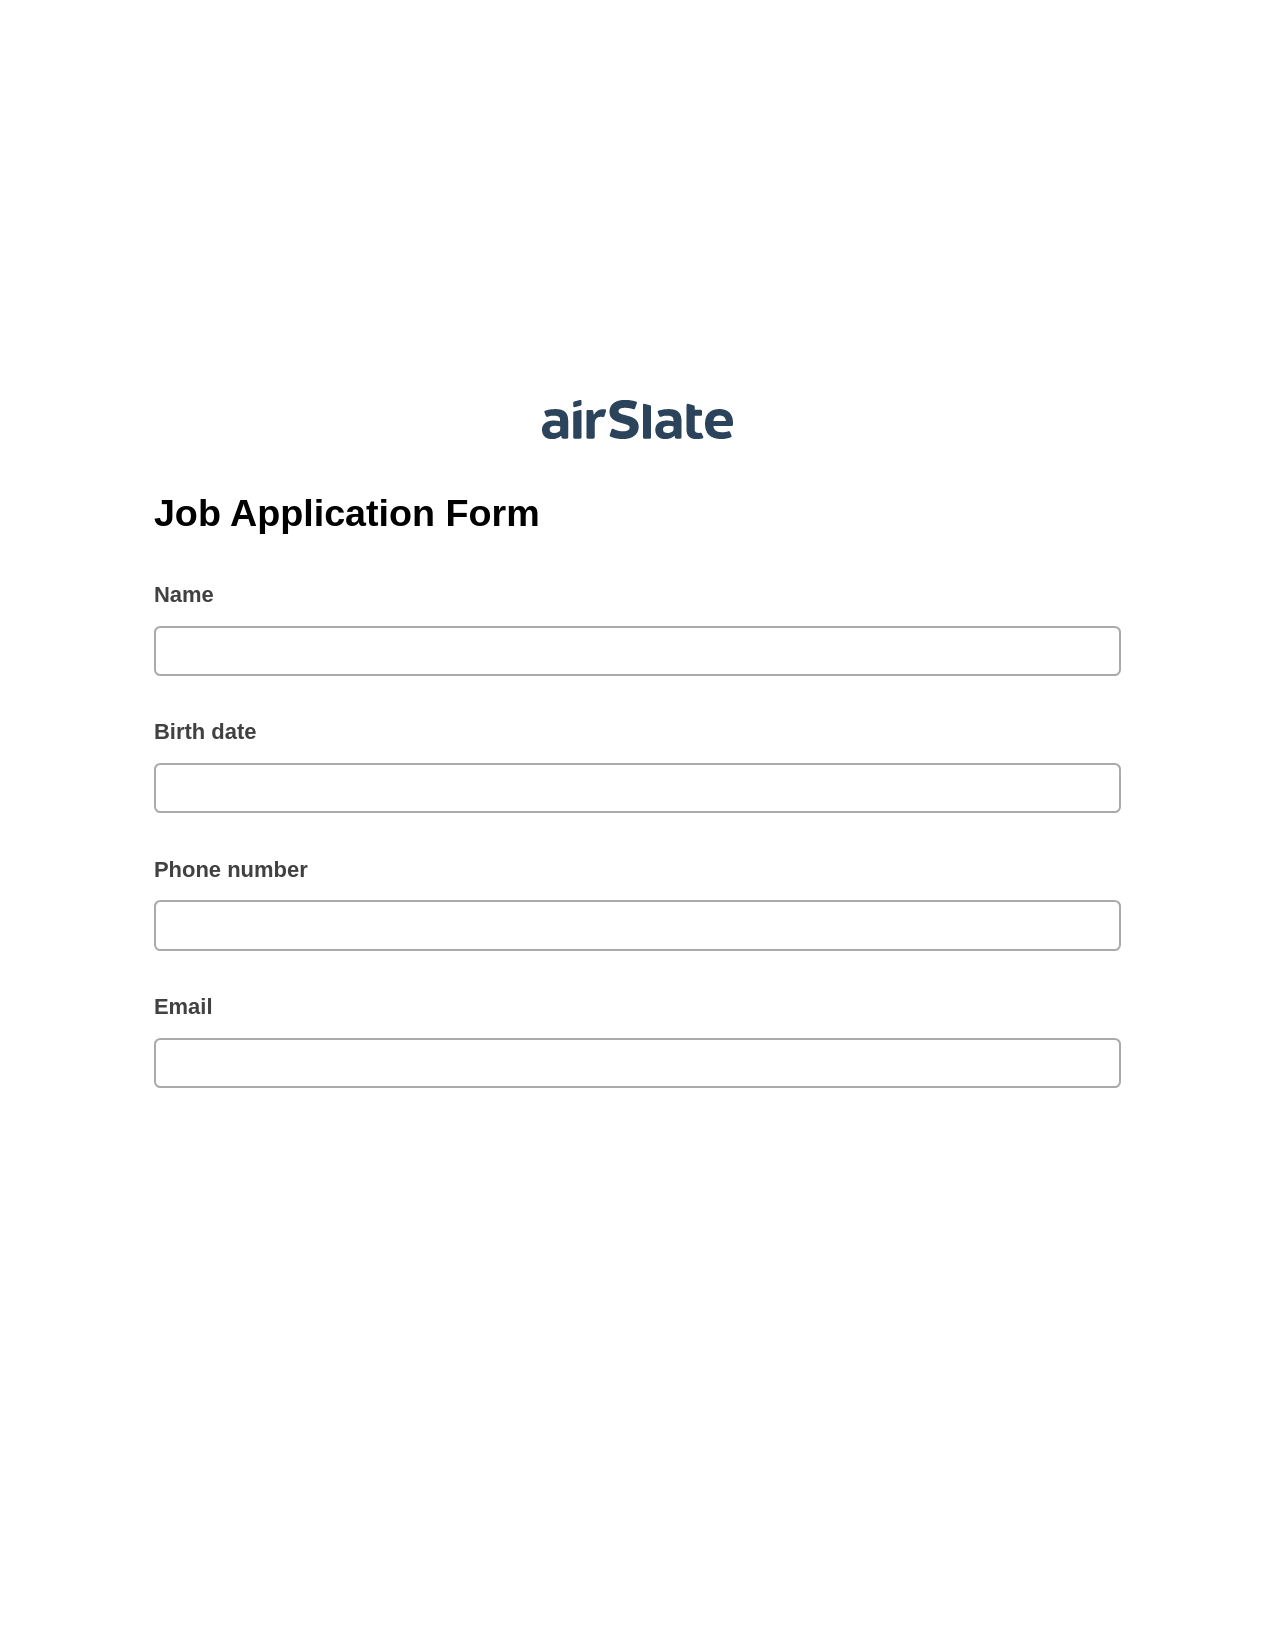 Multirole Job Application Form Pre-fill Dropdown from Airtable, System Bot - Create a Slate in another Flow, Slack Notification Postfinish Bot